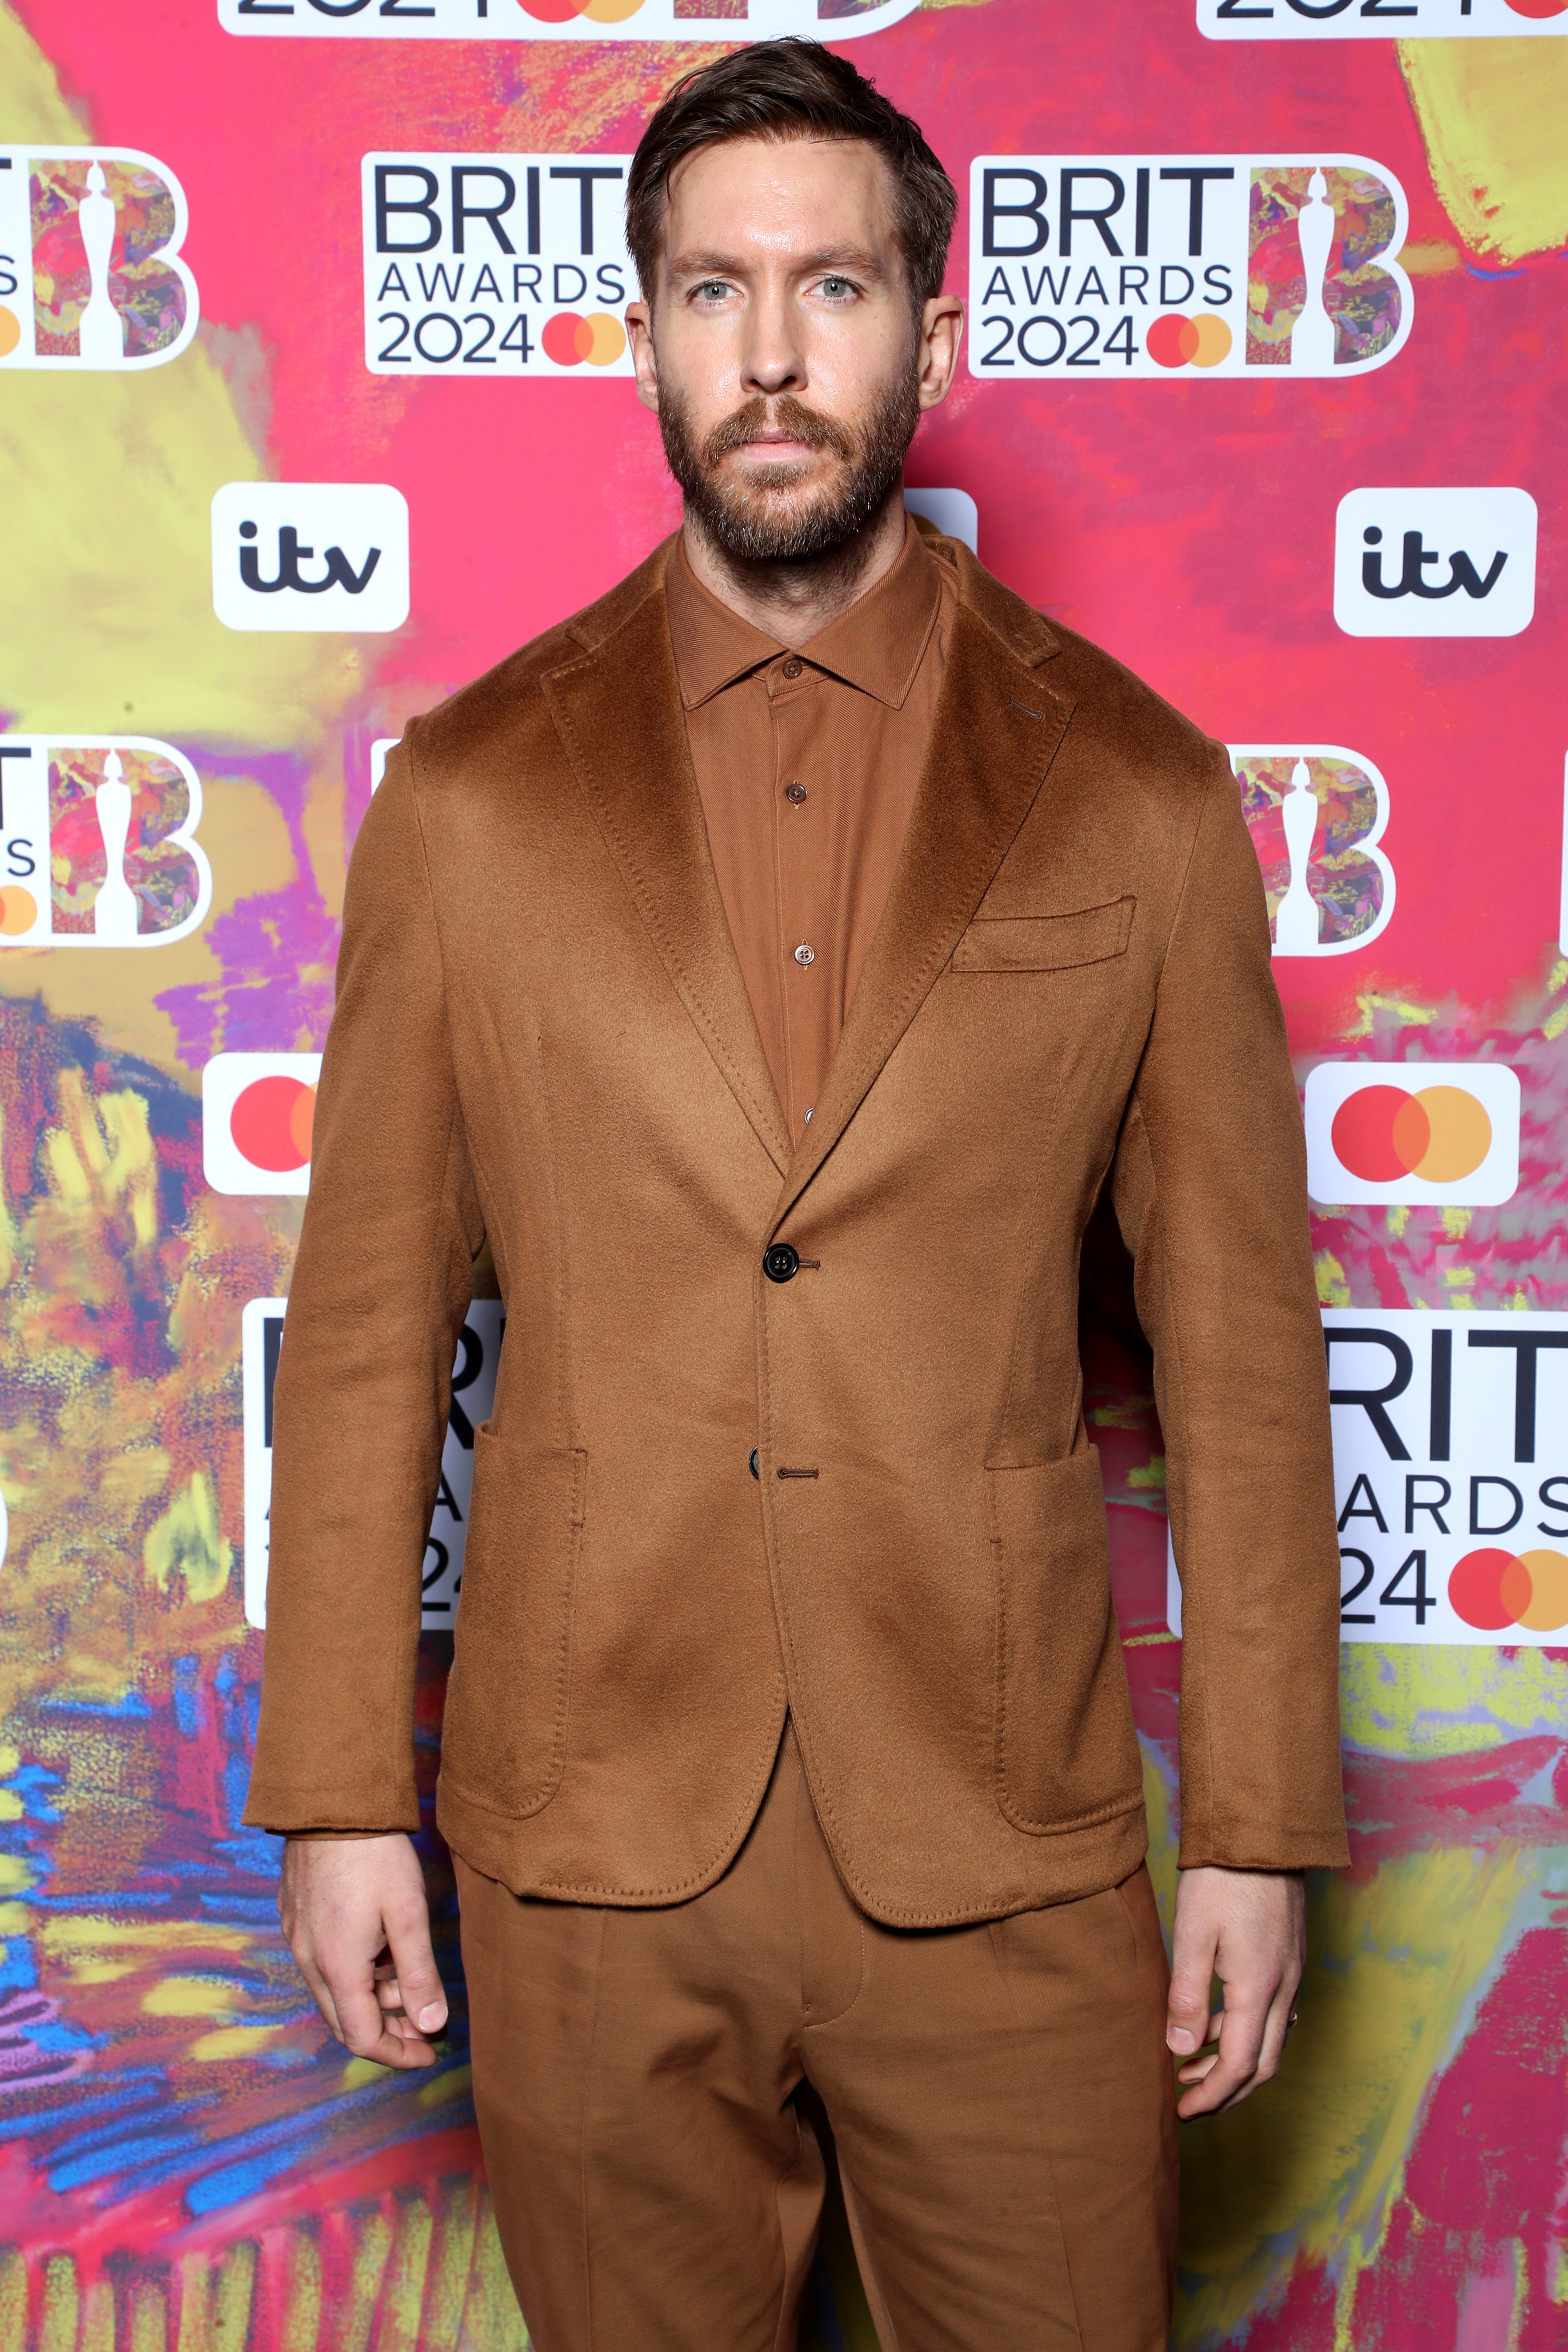 Calvin Harris in a brown suit at the BRIT Awards 2024 red carpet